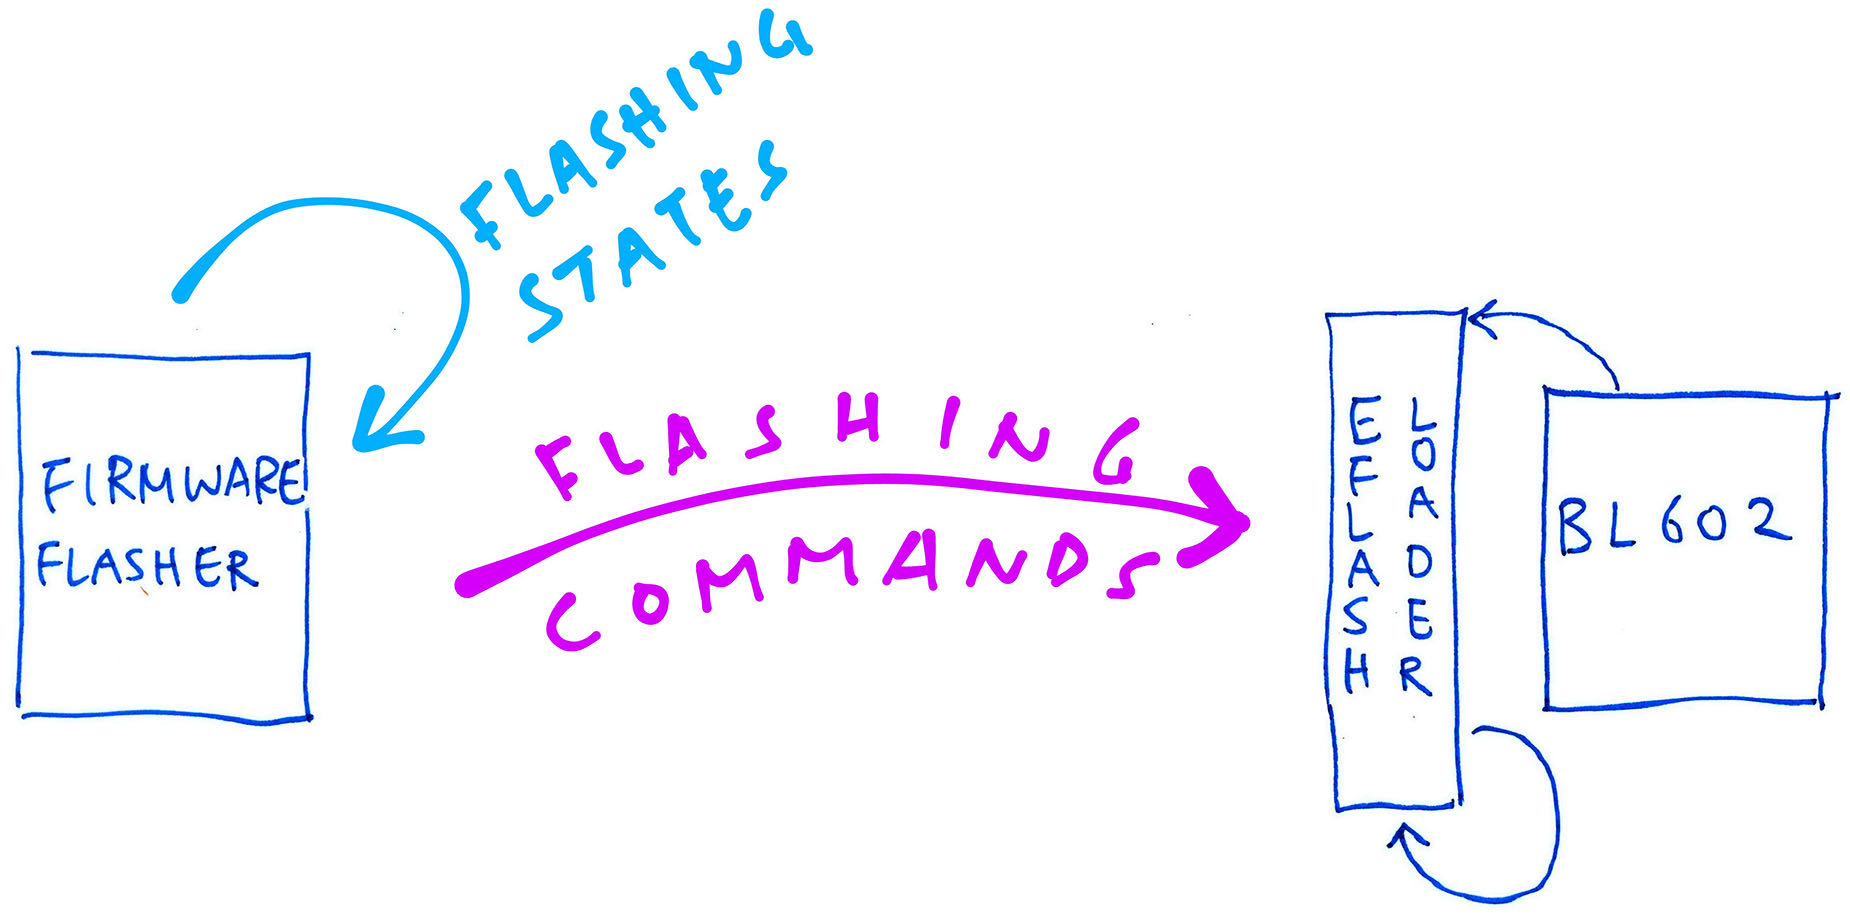 Match Flashing States and Commands